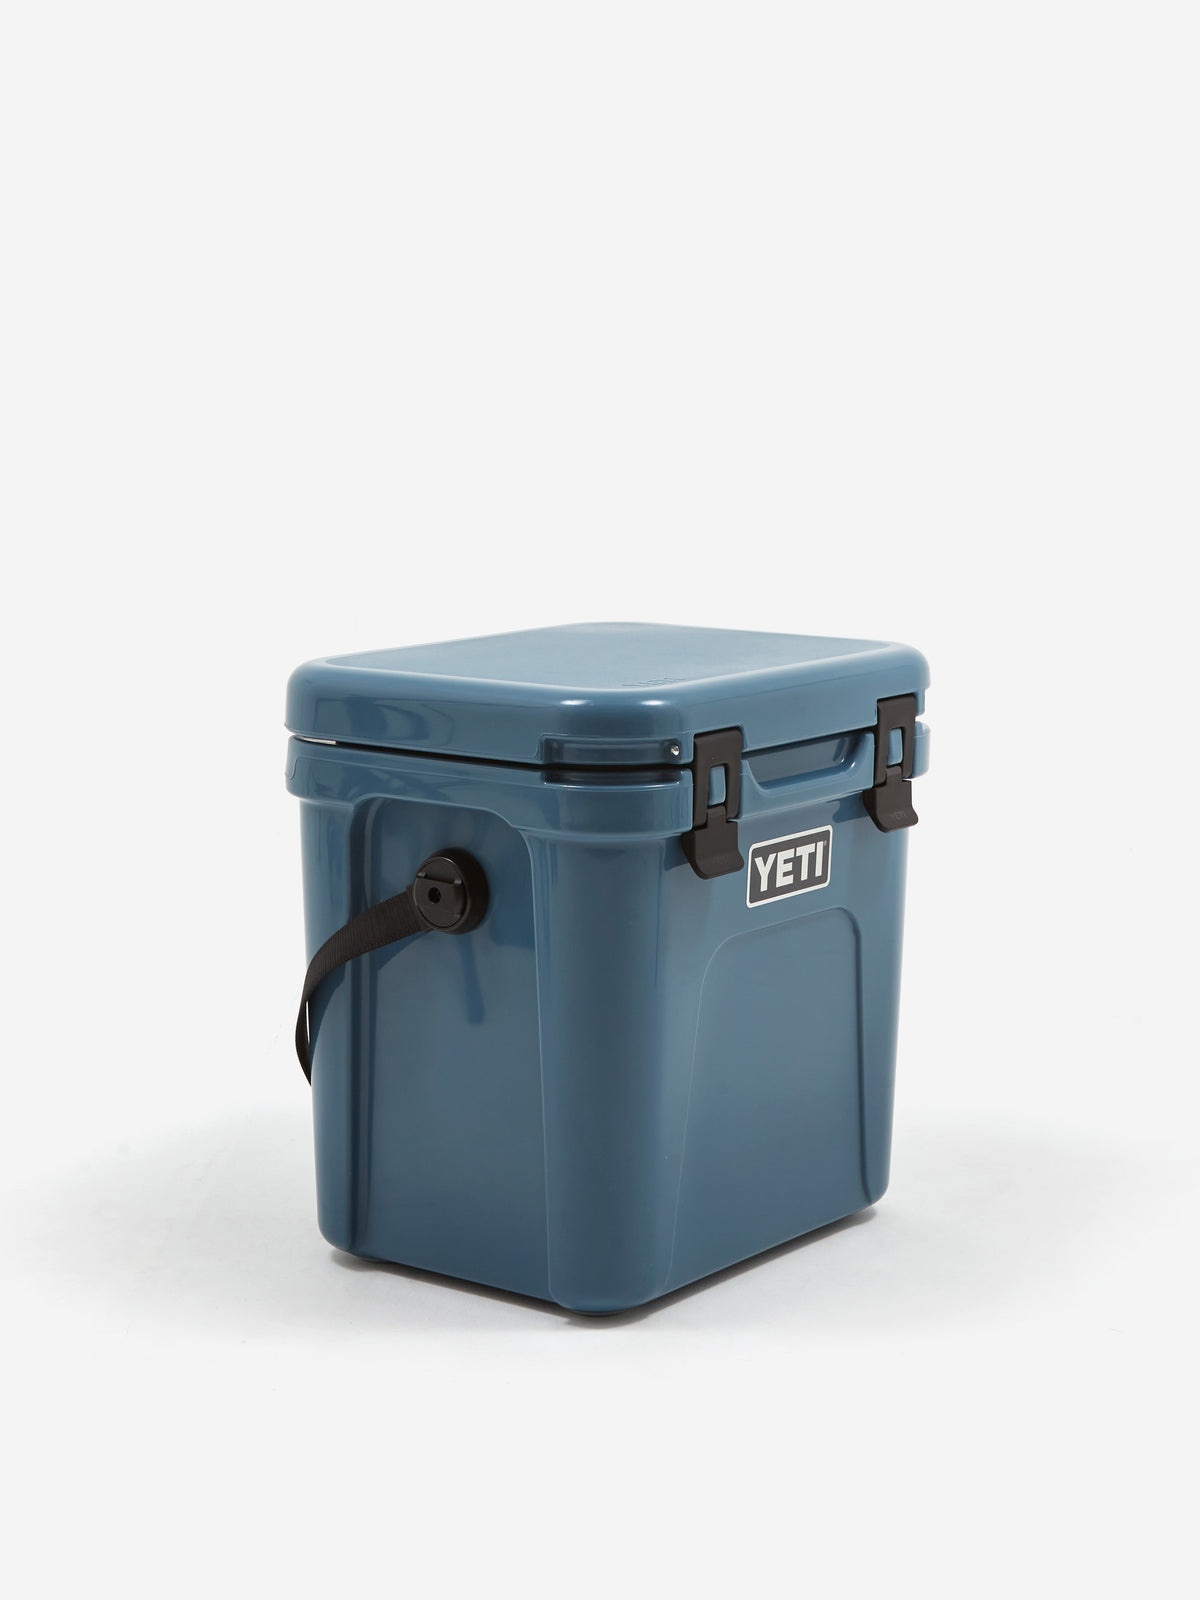 https://www.goodhoodstore.shop/wp-content/uploads/1692/13/find-great-online-shopping-at-affordable-prices-using-yeti-roadie-24-nordic-blue-yeti_1.jpg